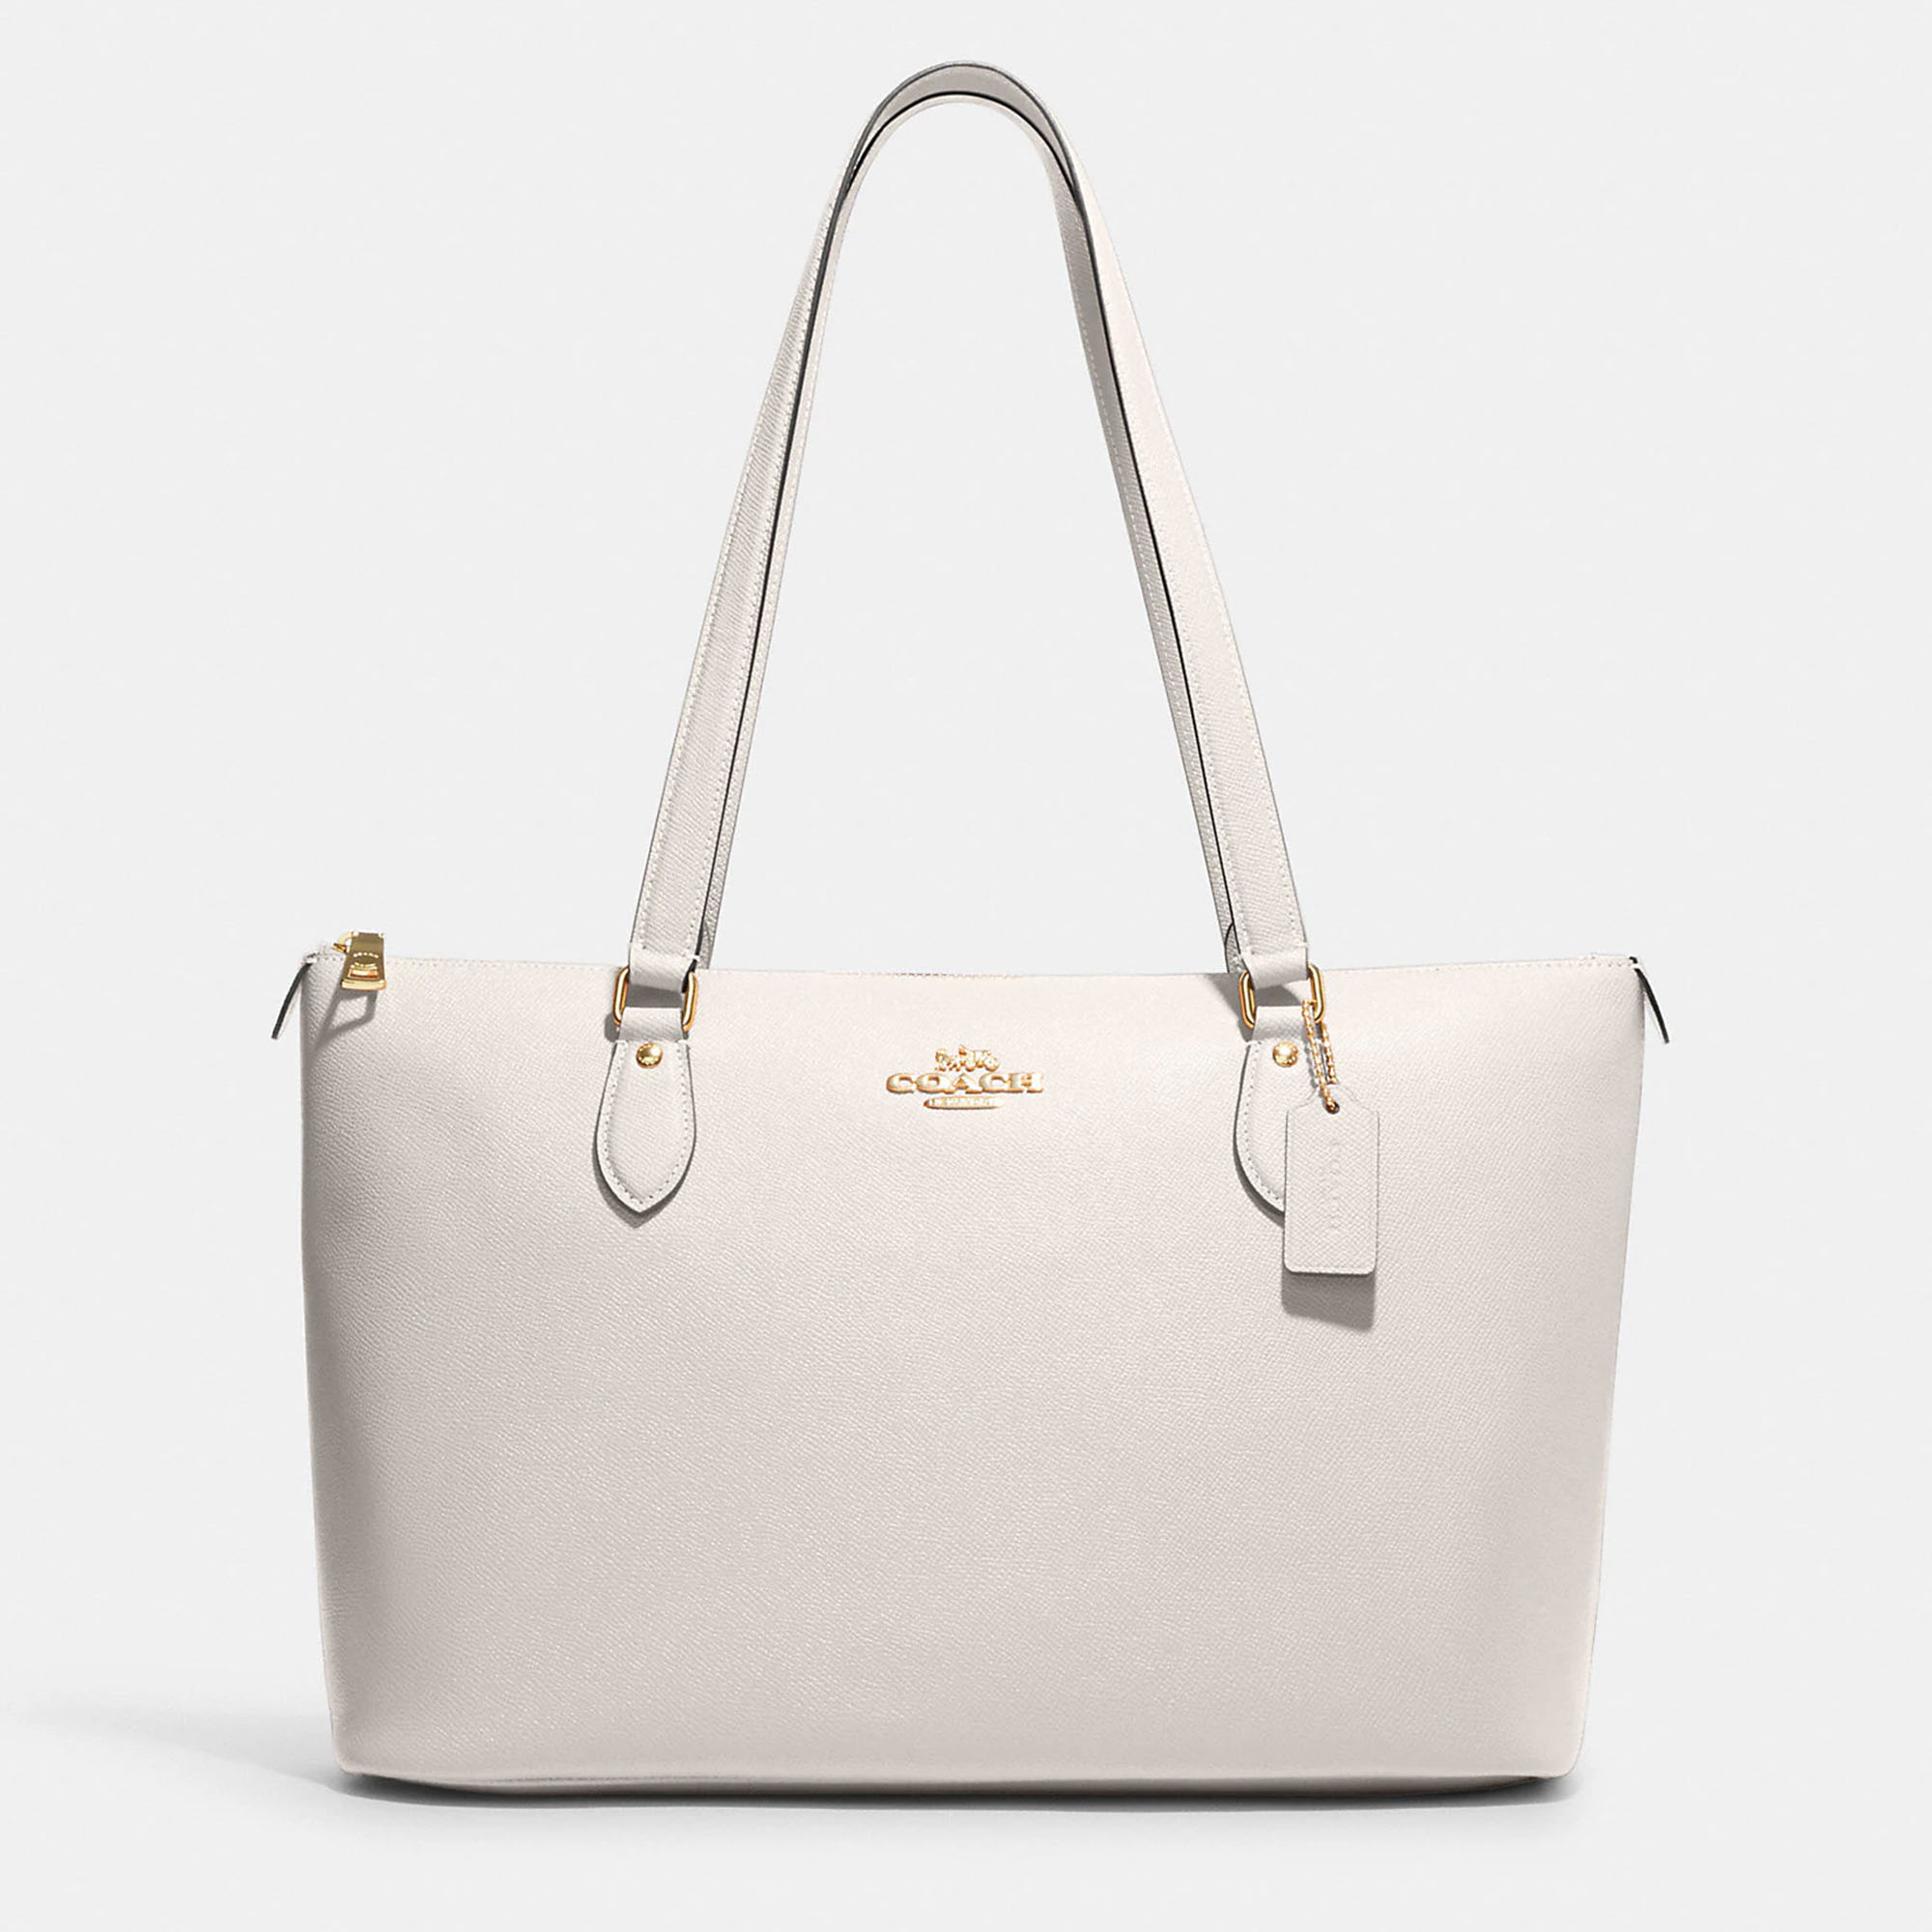 Pre-owned Coach White Leather Tote